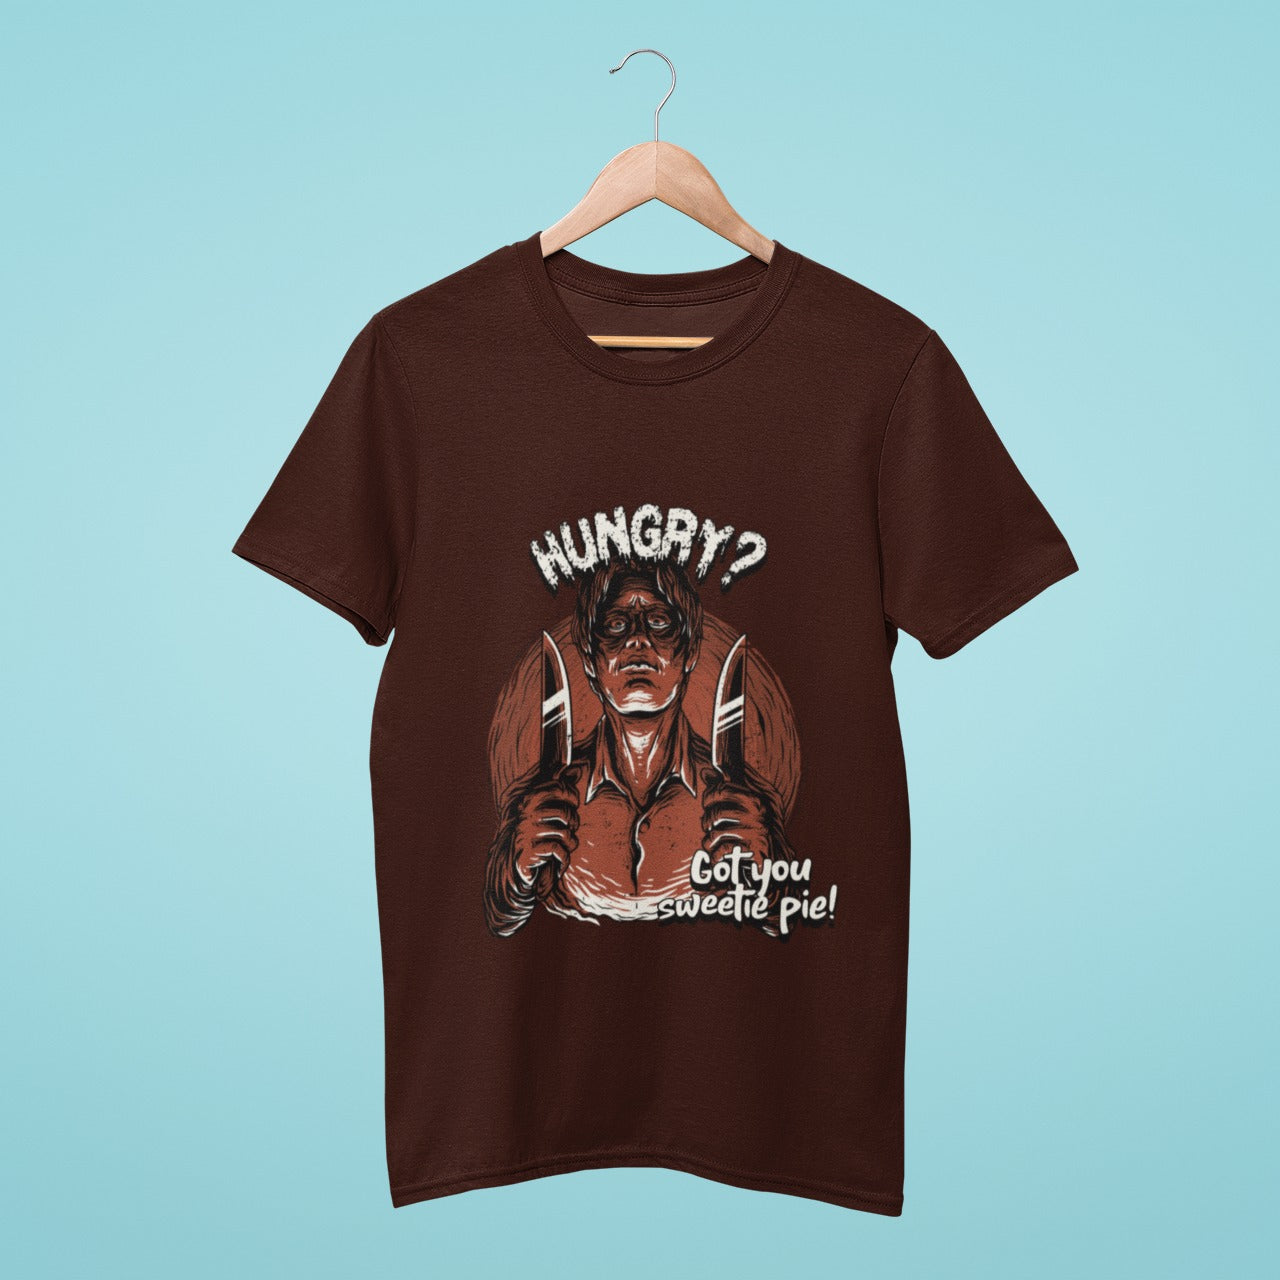 Looking for a humorous and edgy t-shirt? Check out this brown tee featuring a graphic of a comically wicked man holding up two knives and taunting "Hungry? Got you sweetie pie!" Perfect for those with a dark sense of humor, this shirt is sure to turn heads and spark conversations. Get your wickedly cool look today!